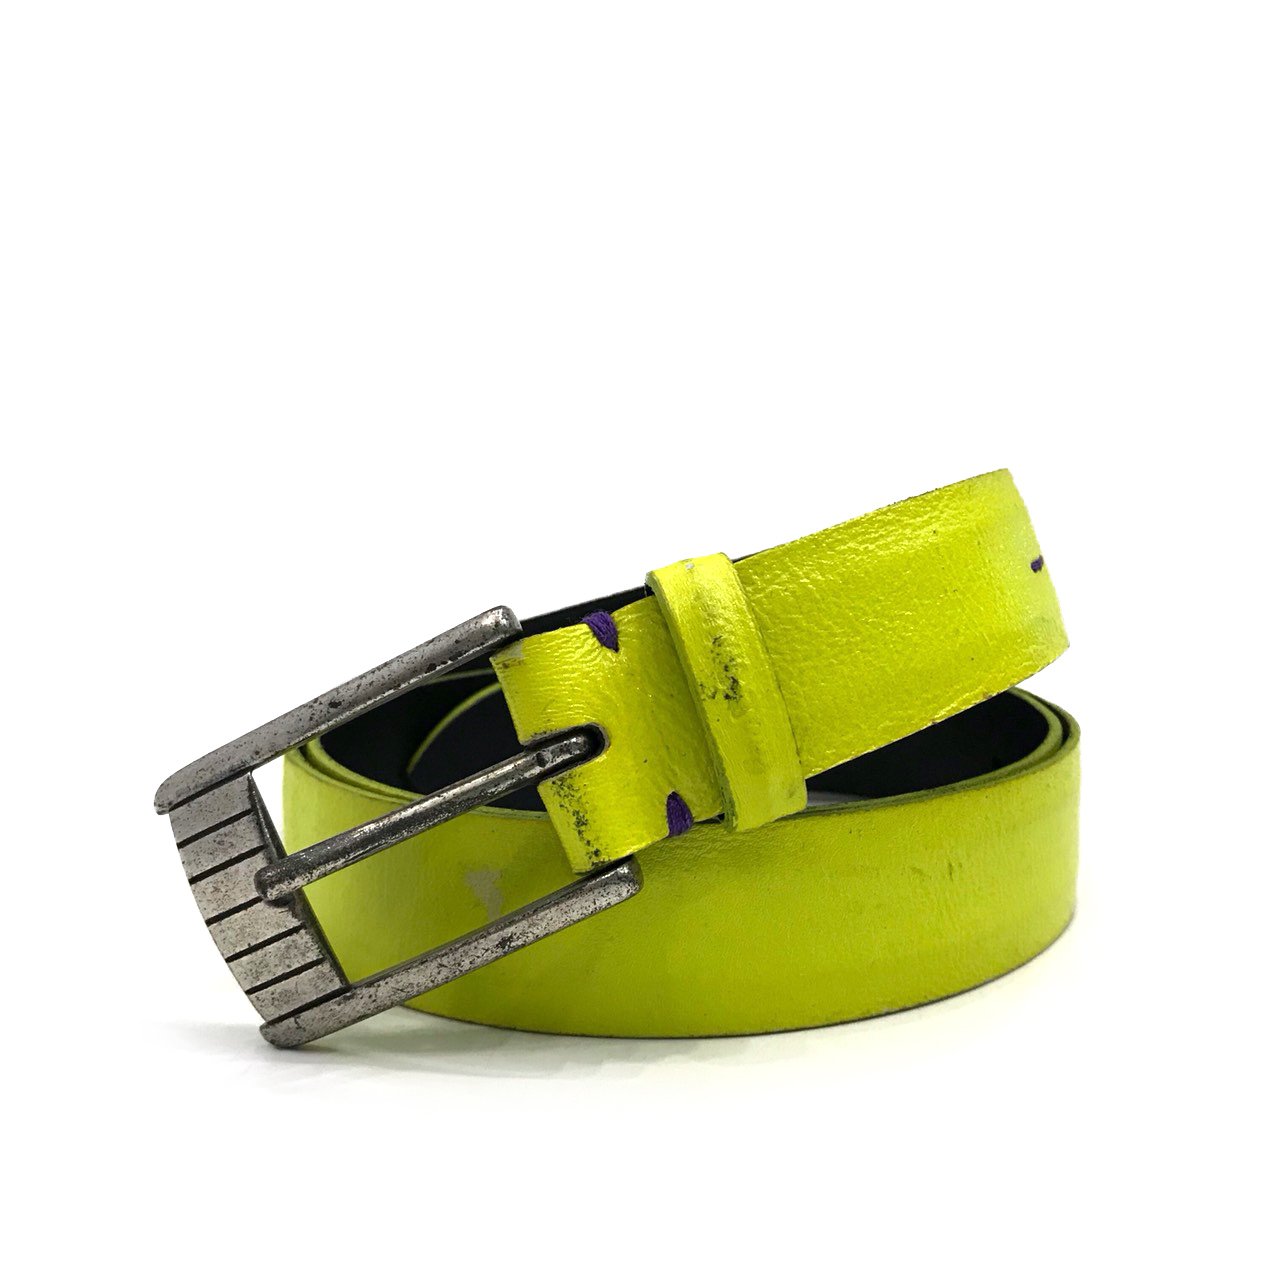 Used Paul Smith Belt 80" in Neon Green Leather RHW